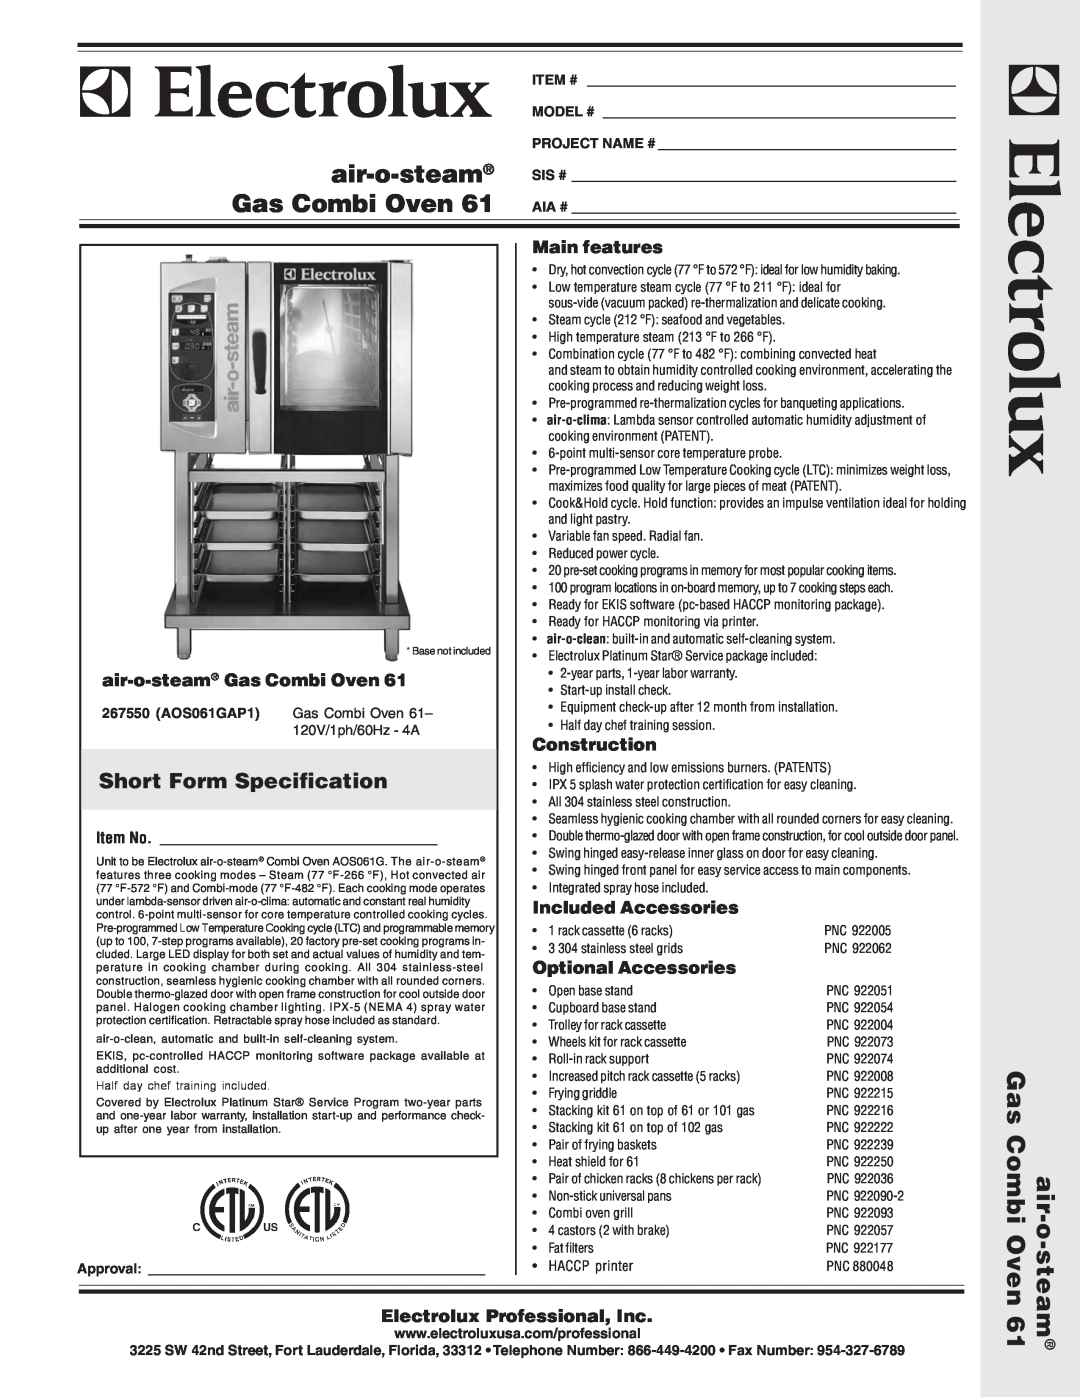 Electrolux AOS061GAP1 warranty Short Form Specification, air-o-steam Gas Combi Oven, Main features, Construction, Item # 